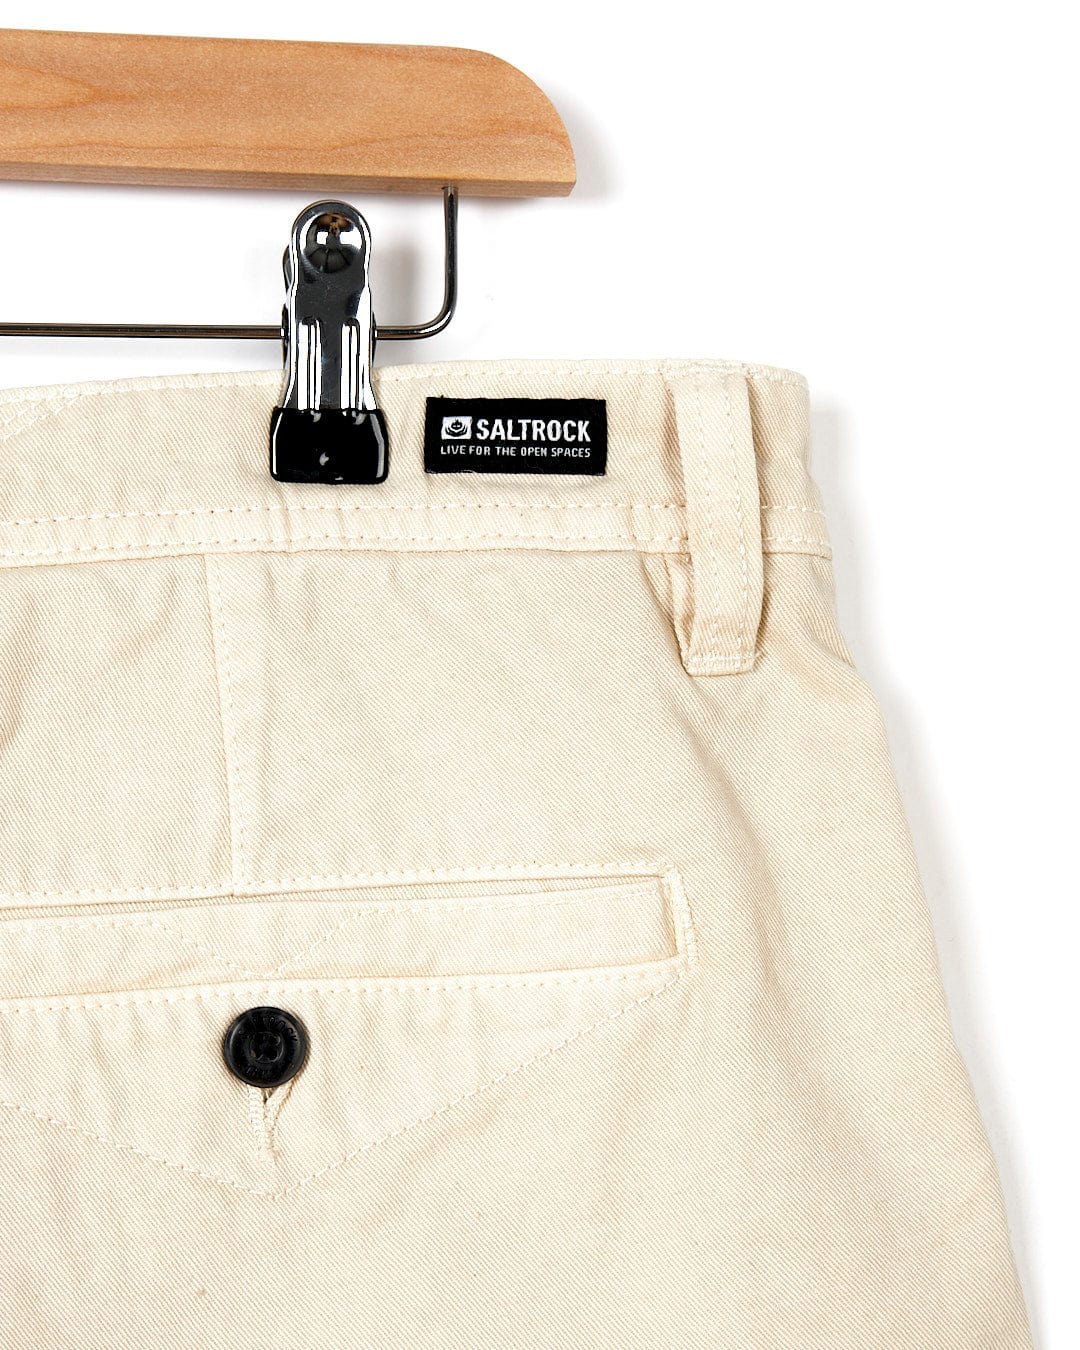 A pair of Sennen - Mens Chino Shorts - Natural hanging on a wooden hanger by Saltrock.